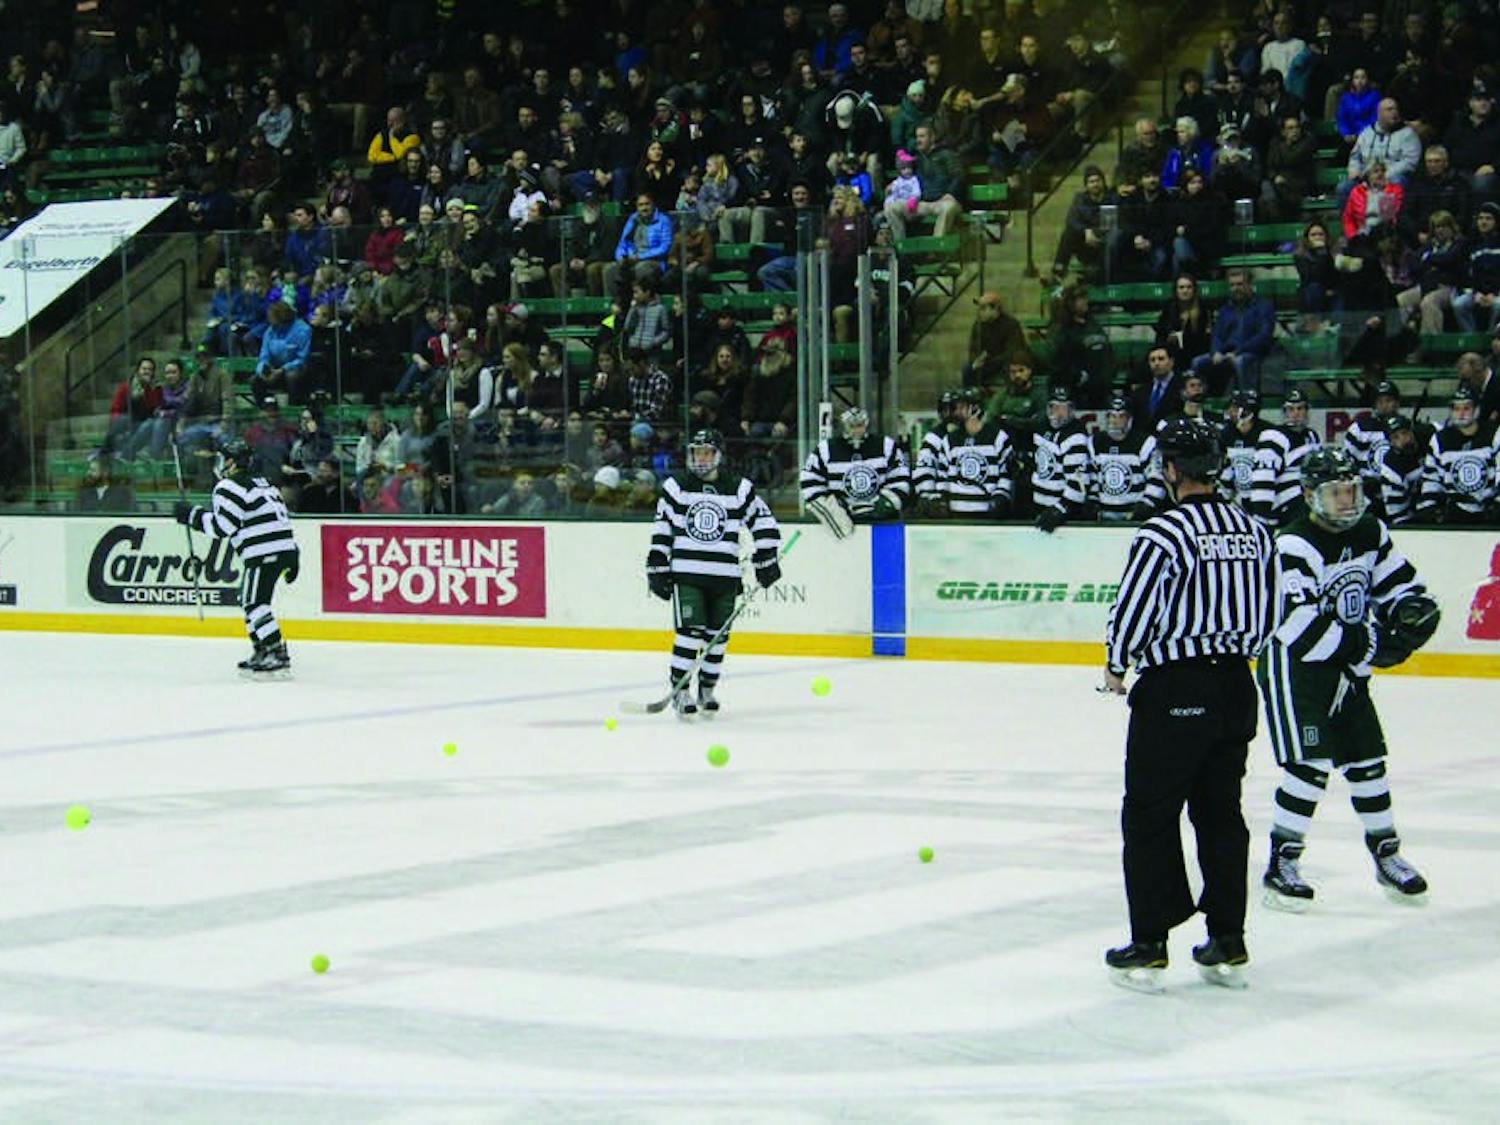 Per tradition, fans throw tennis balls onto the ice after the first Dartmouth goal against Princeton University.